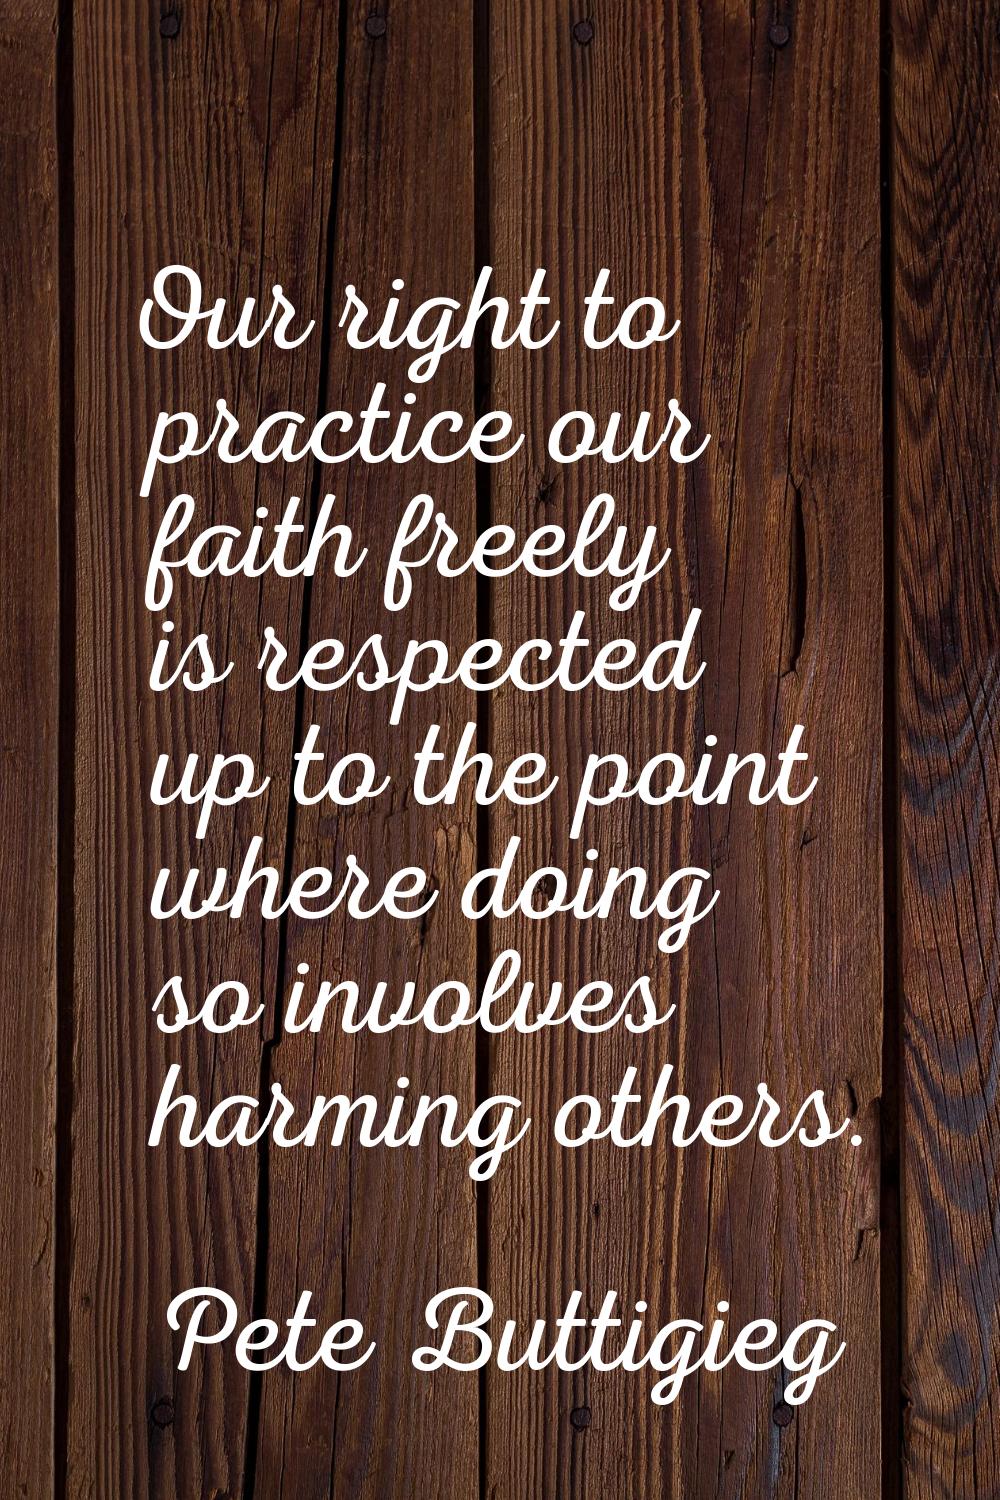 Our right to practice our faith freely is respected up to the point where doing so involves harming